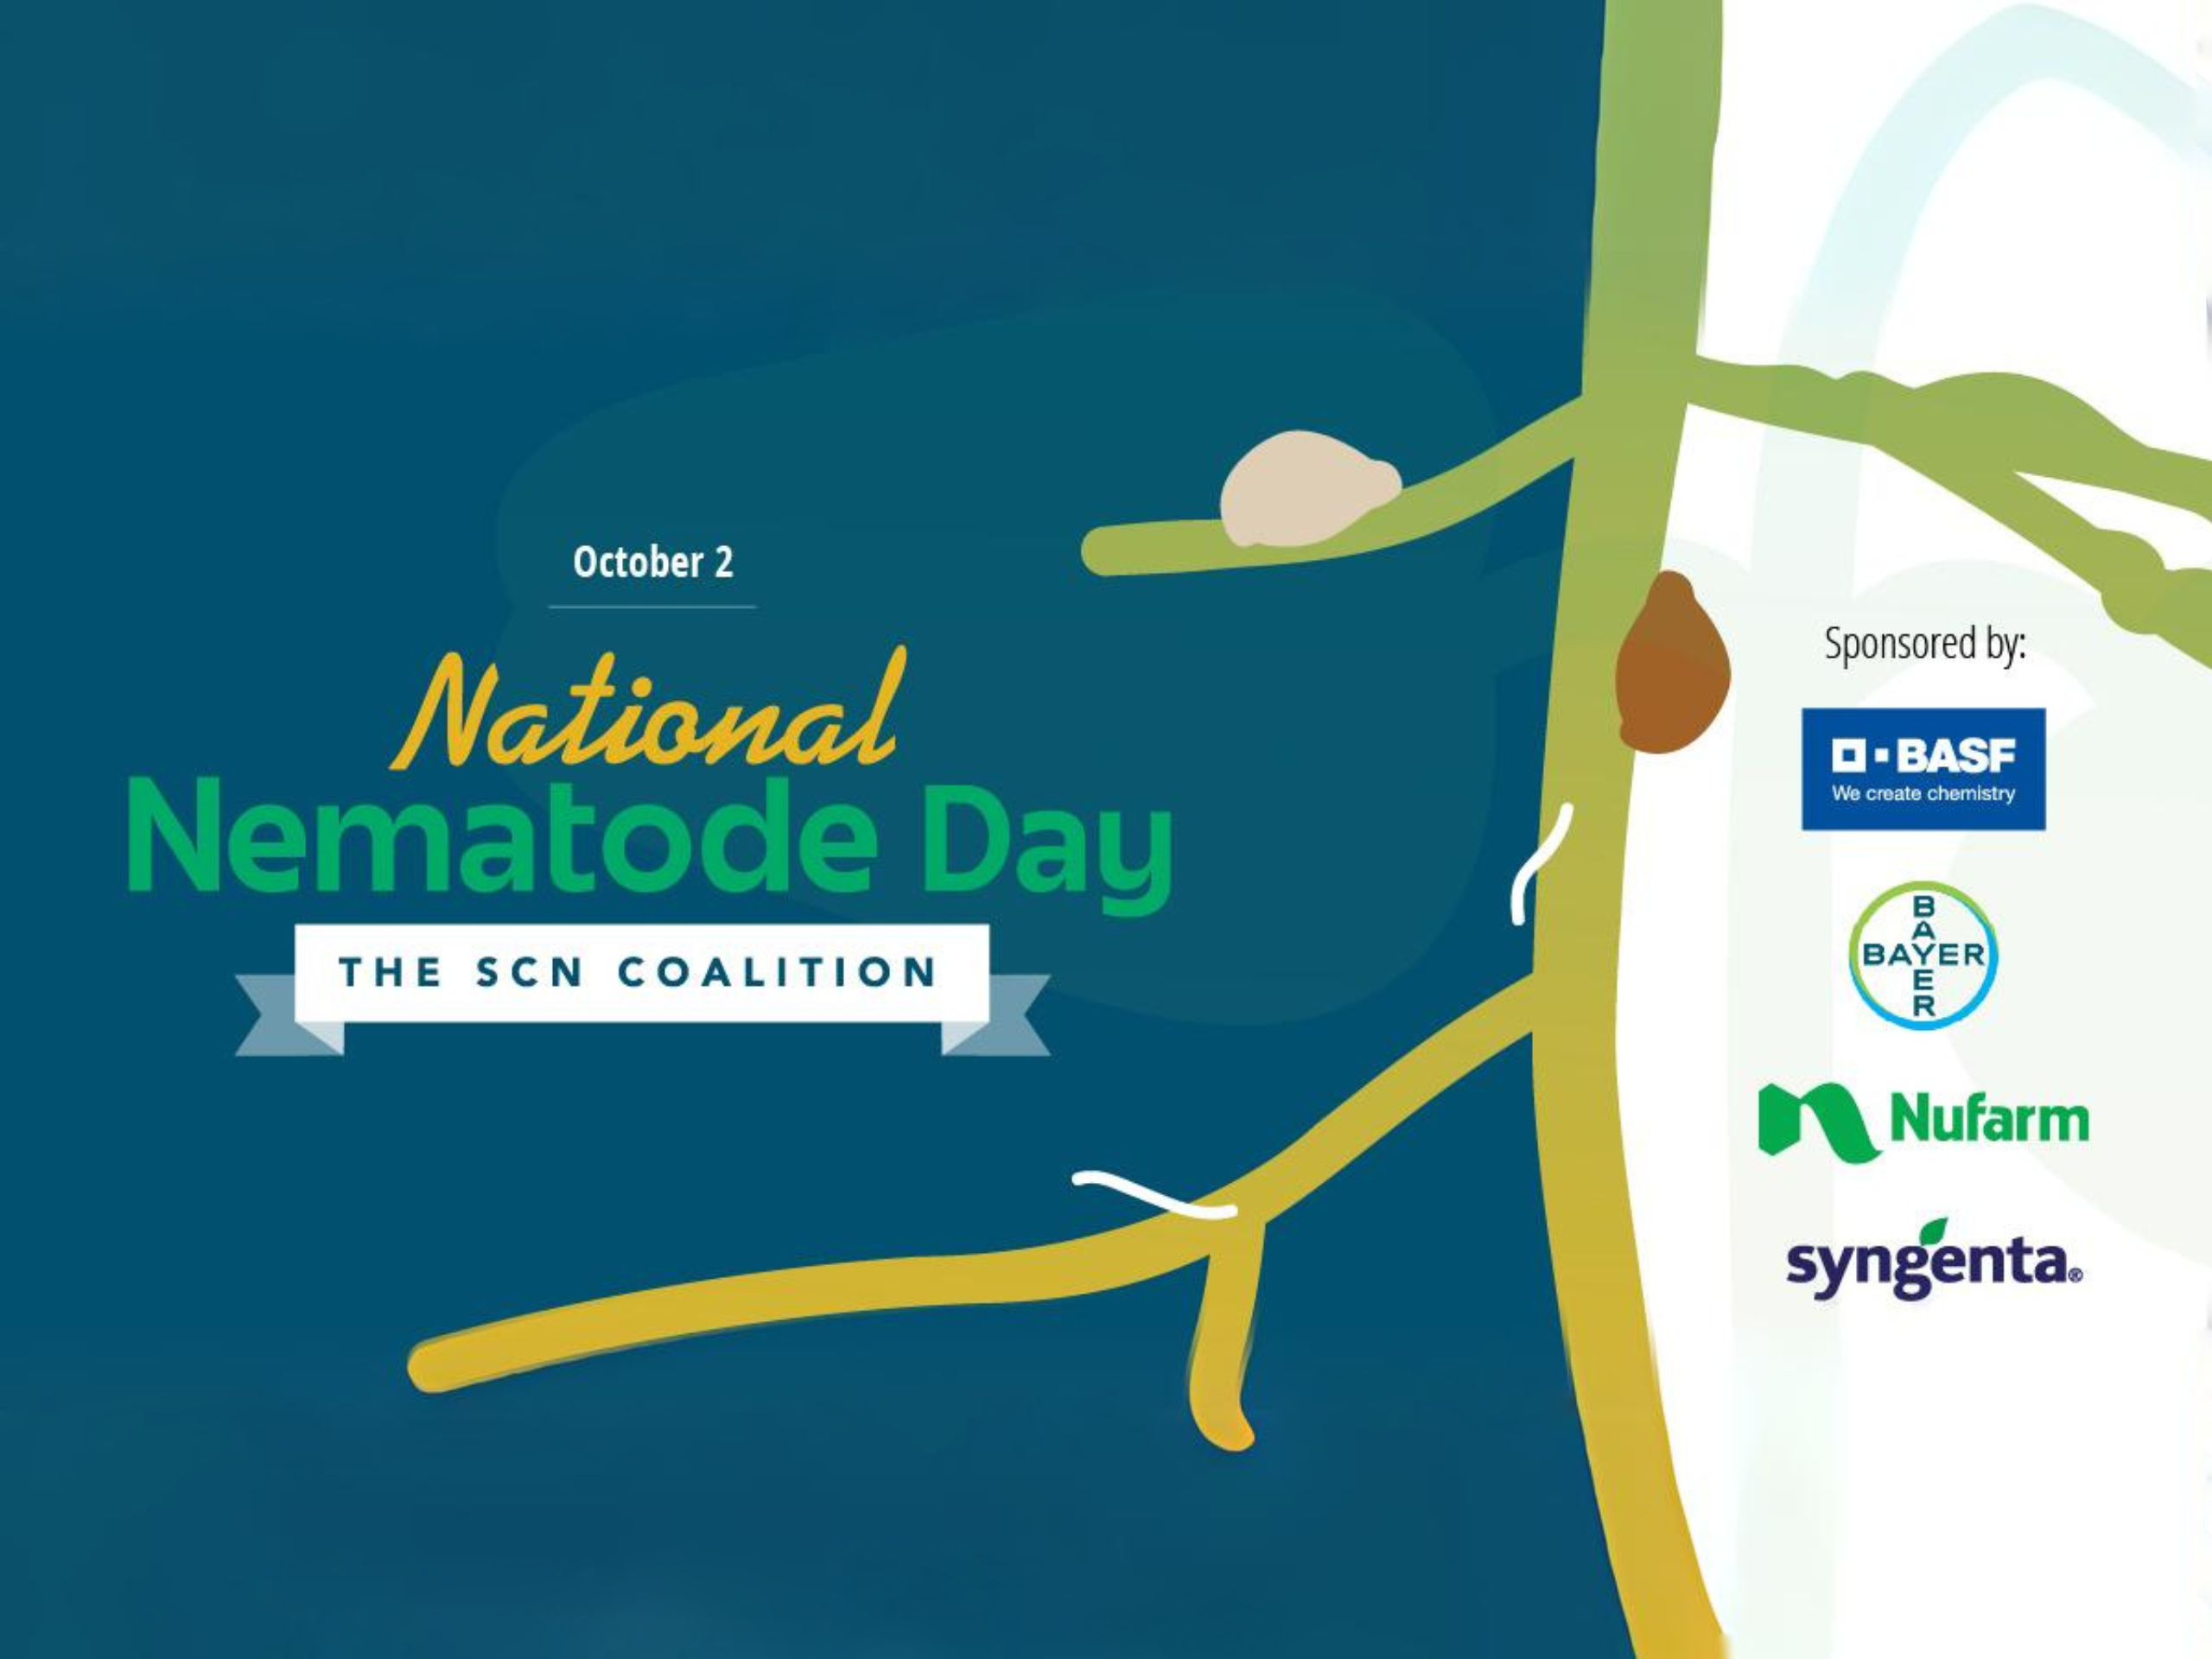 A graphic that says National Nematode Day with a list of sponsors on the right. AI has been used to extend the edges of the image.